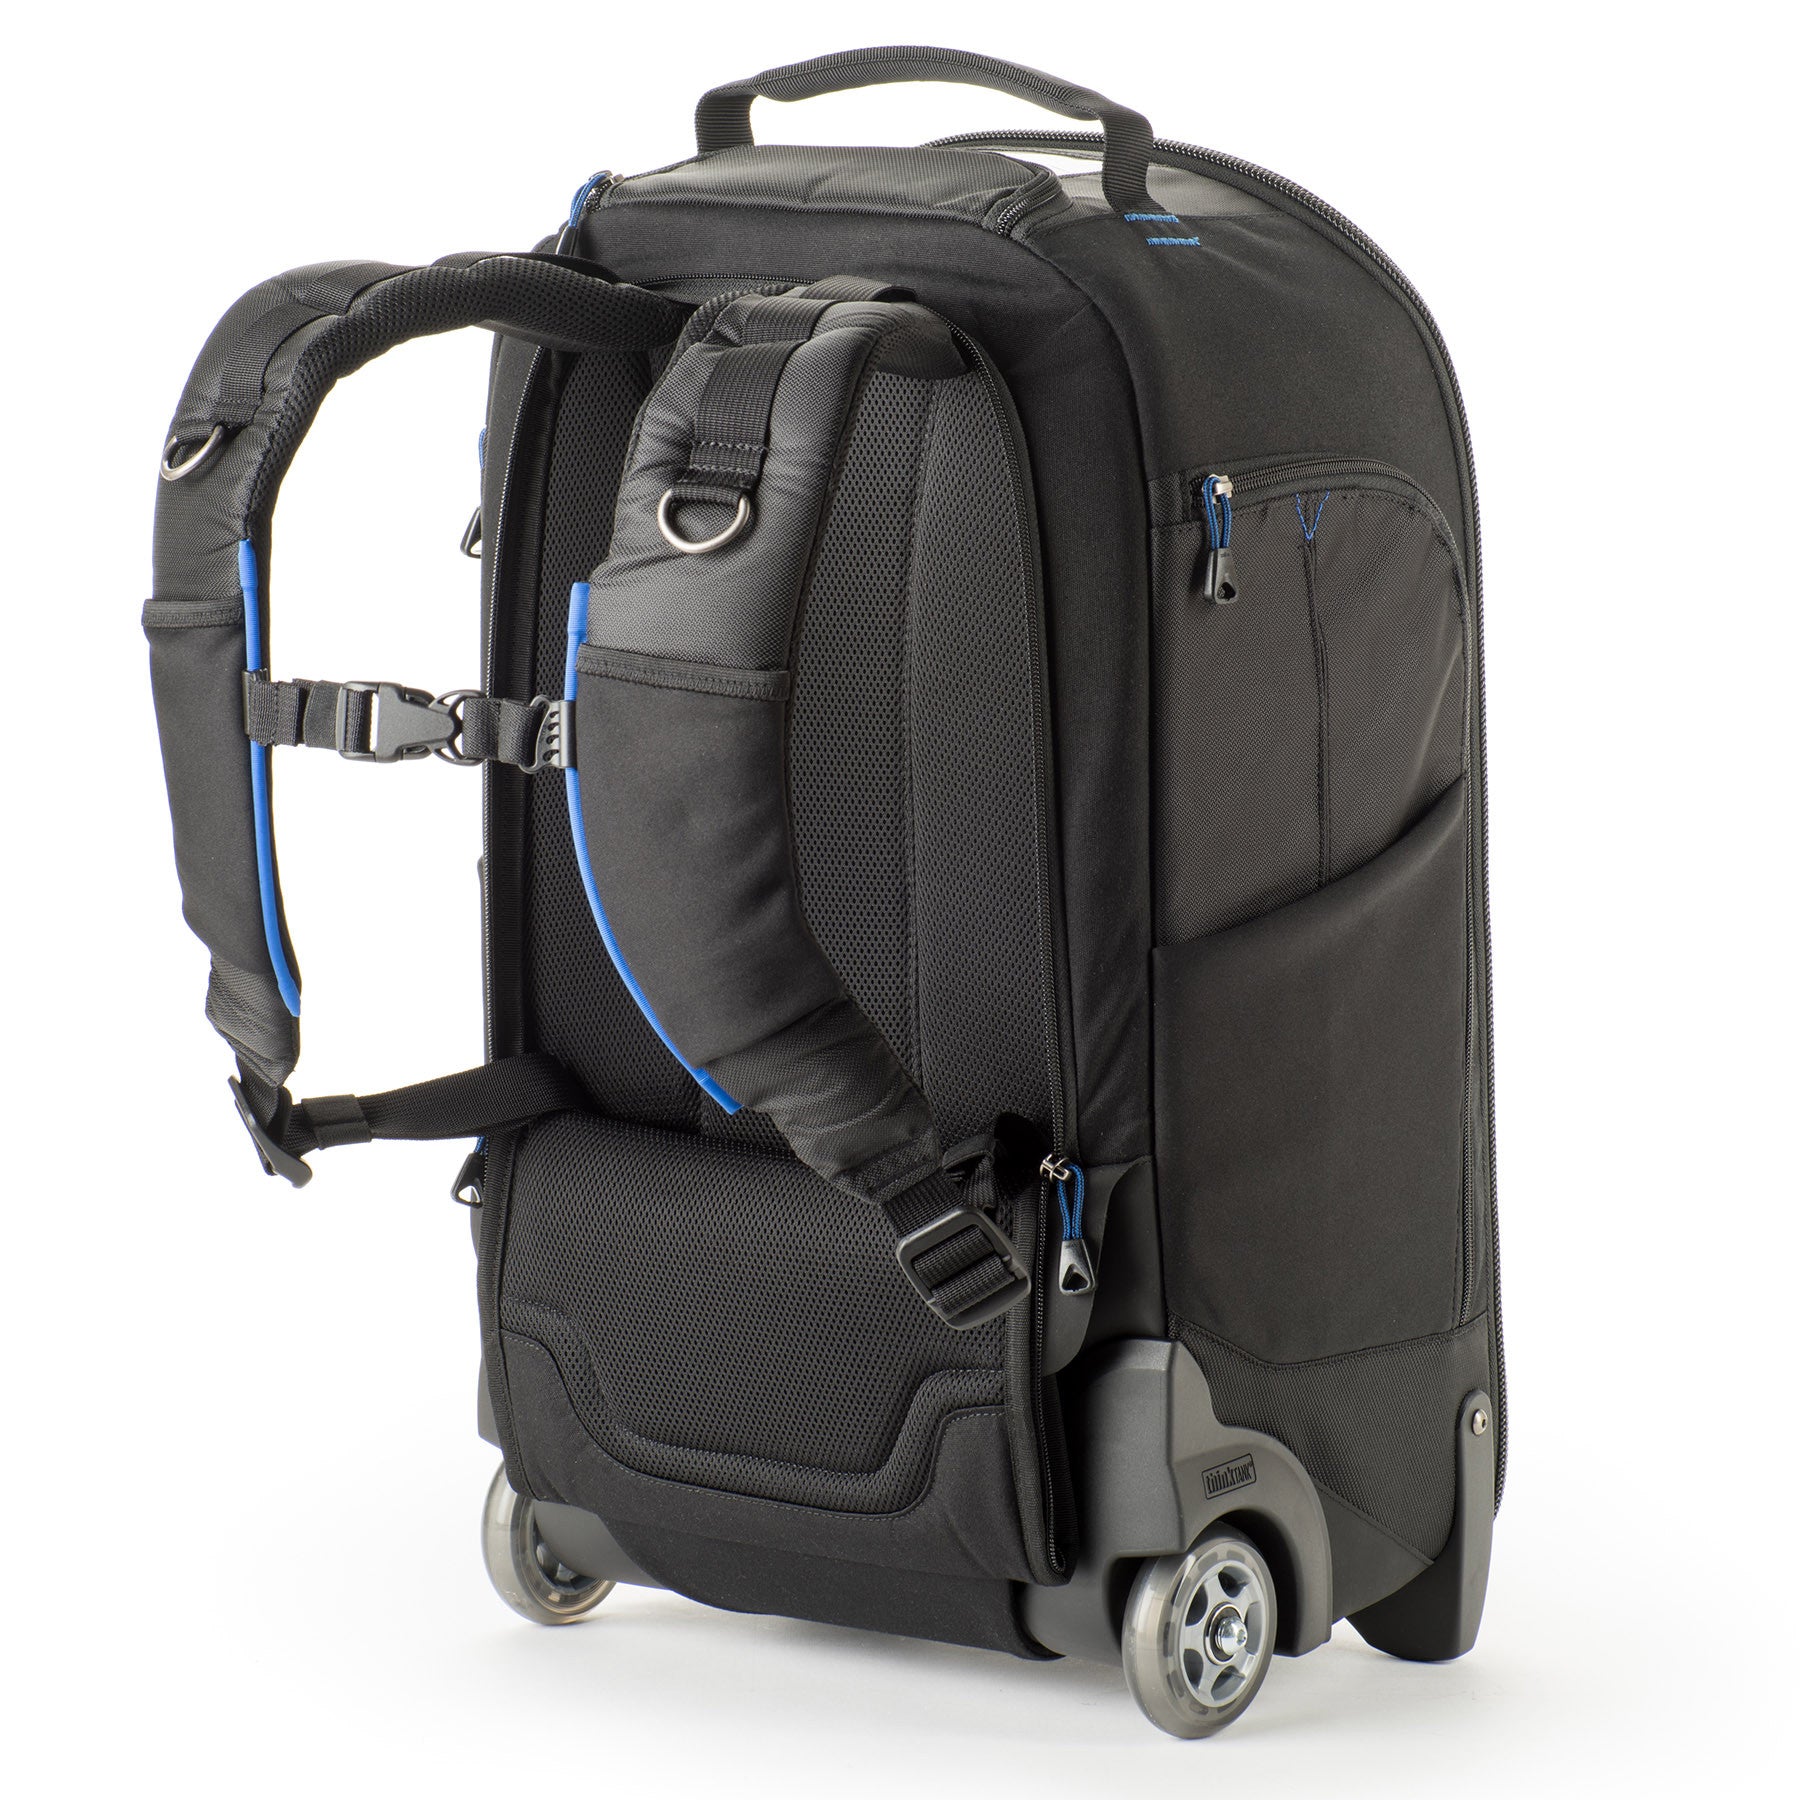 Rolling Backpack V2.0 photography backpack combo – Think Tank Photo